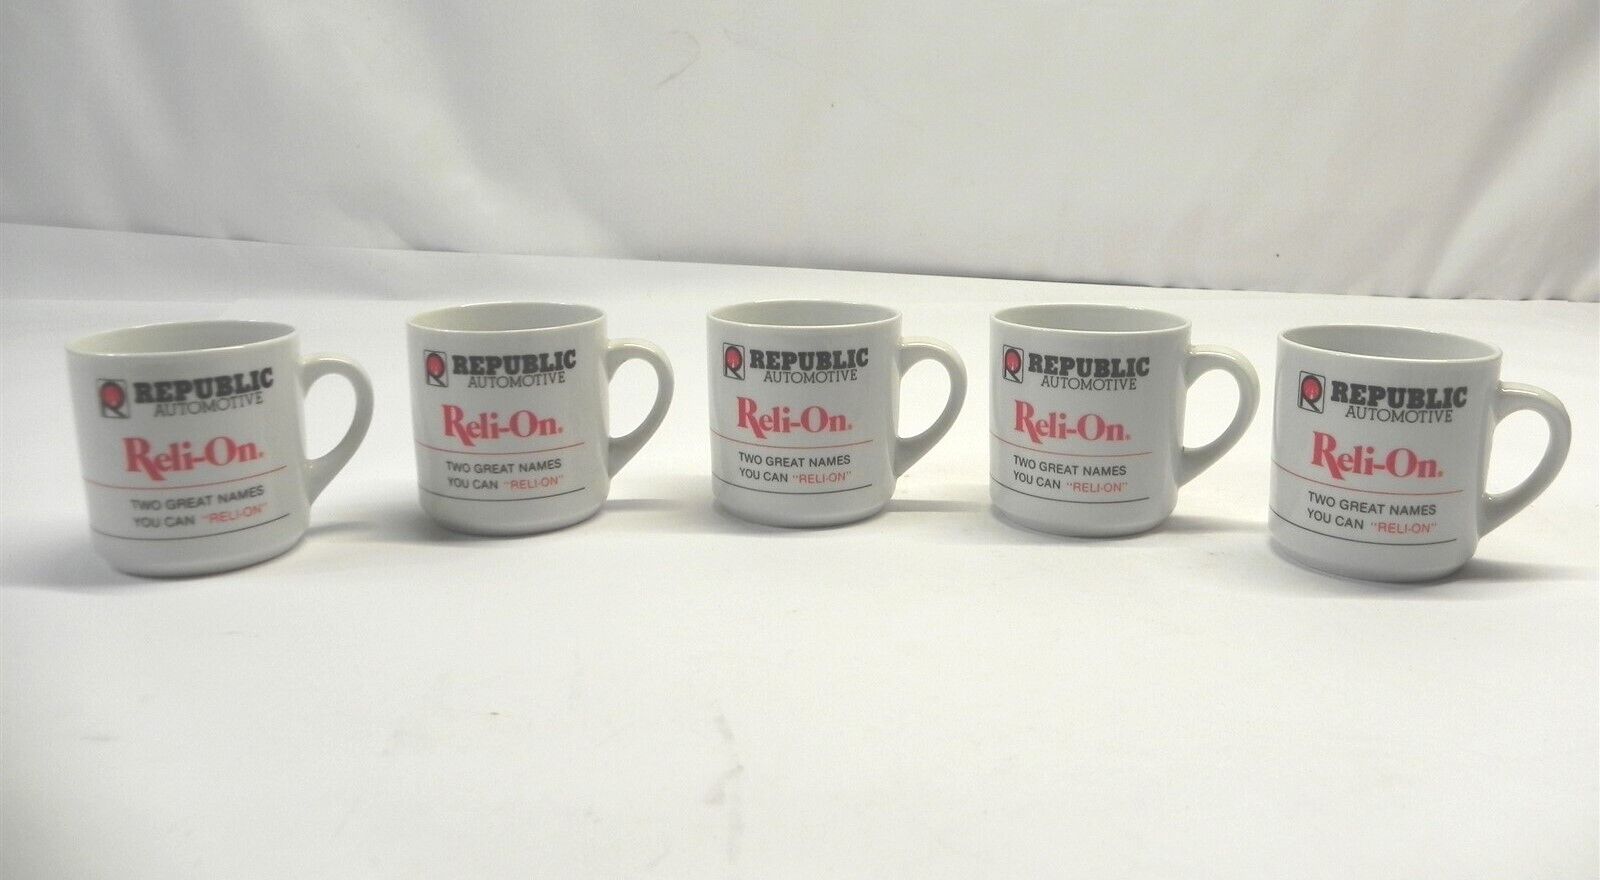 VINTAGE SET OF 5 REPUBLIC AUTOMOTIVE RELI-ON COFFEE MUG CUPS PRE-OWNED USED 